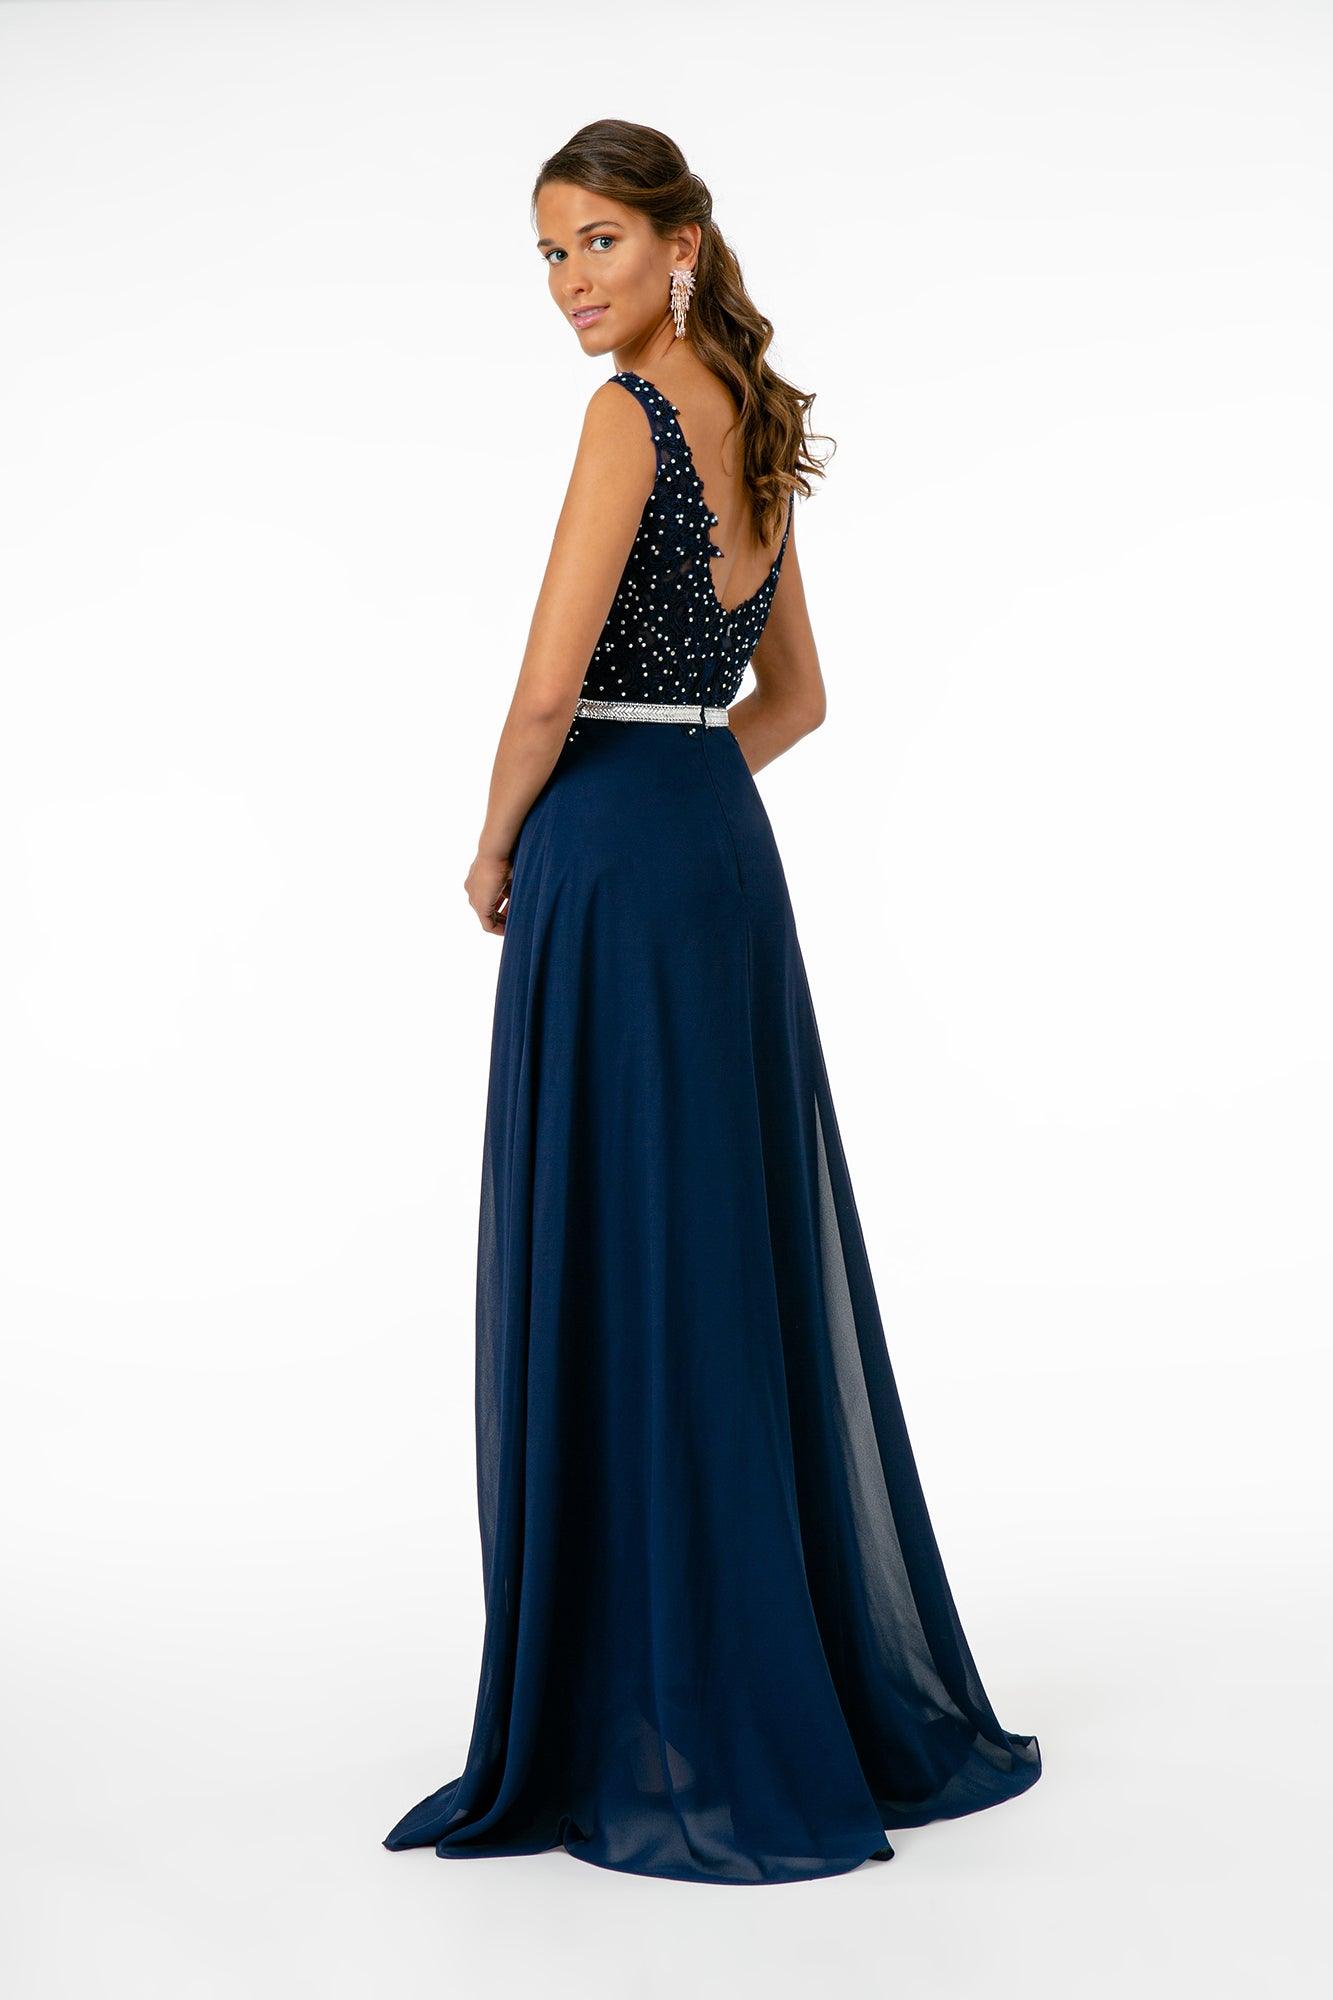 Long Formal Chiffon Prom Dress - The Dress Outlet